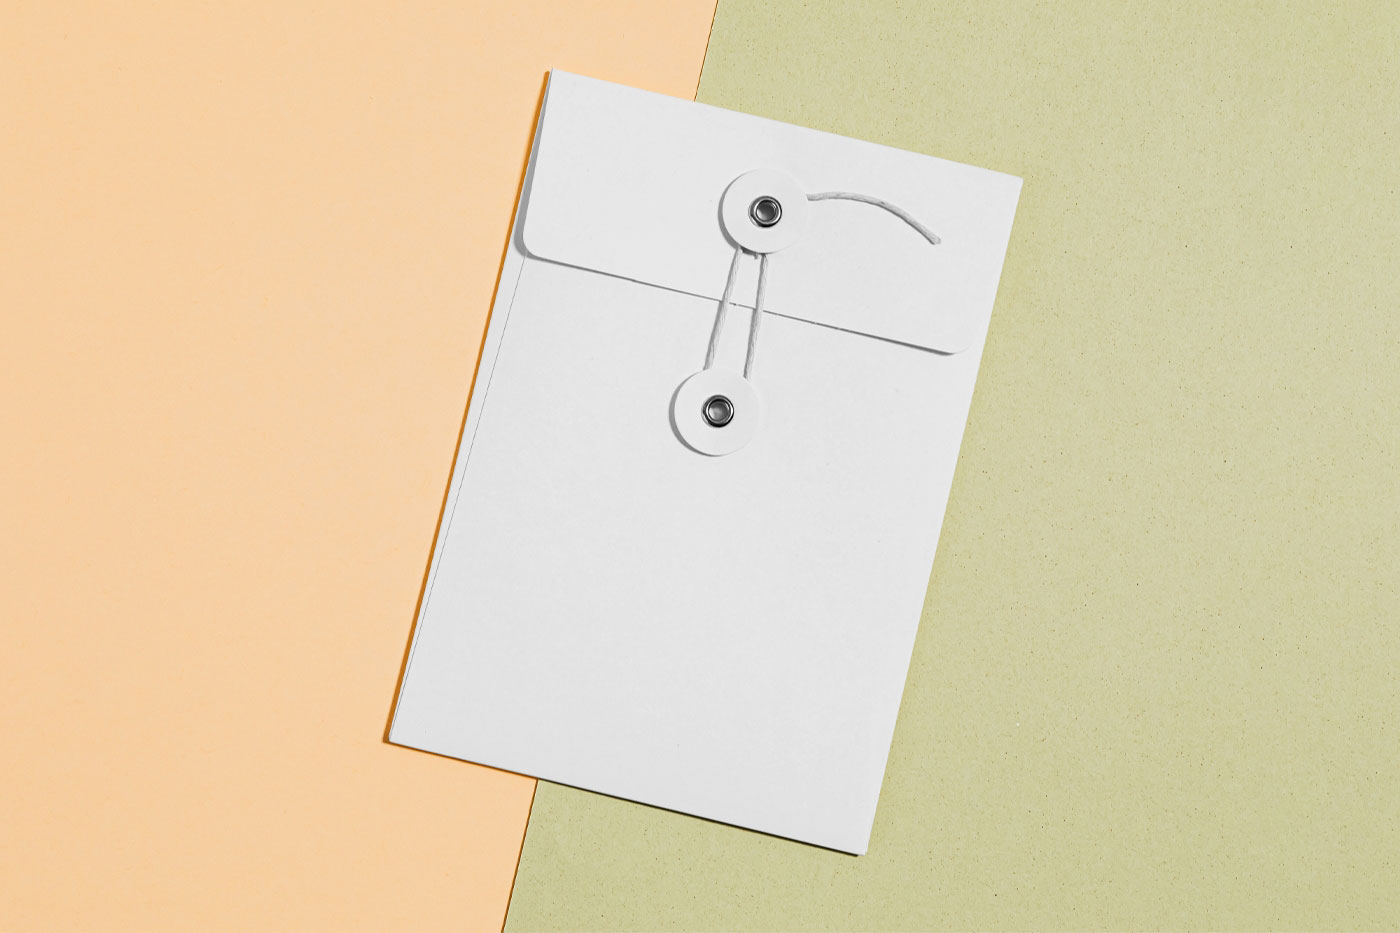 Top View of a Thread and Pin Craft Envelope Mockup FREE PSD